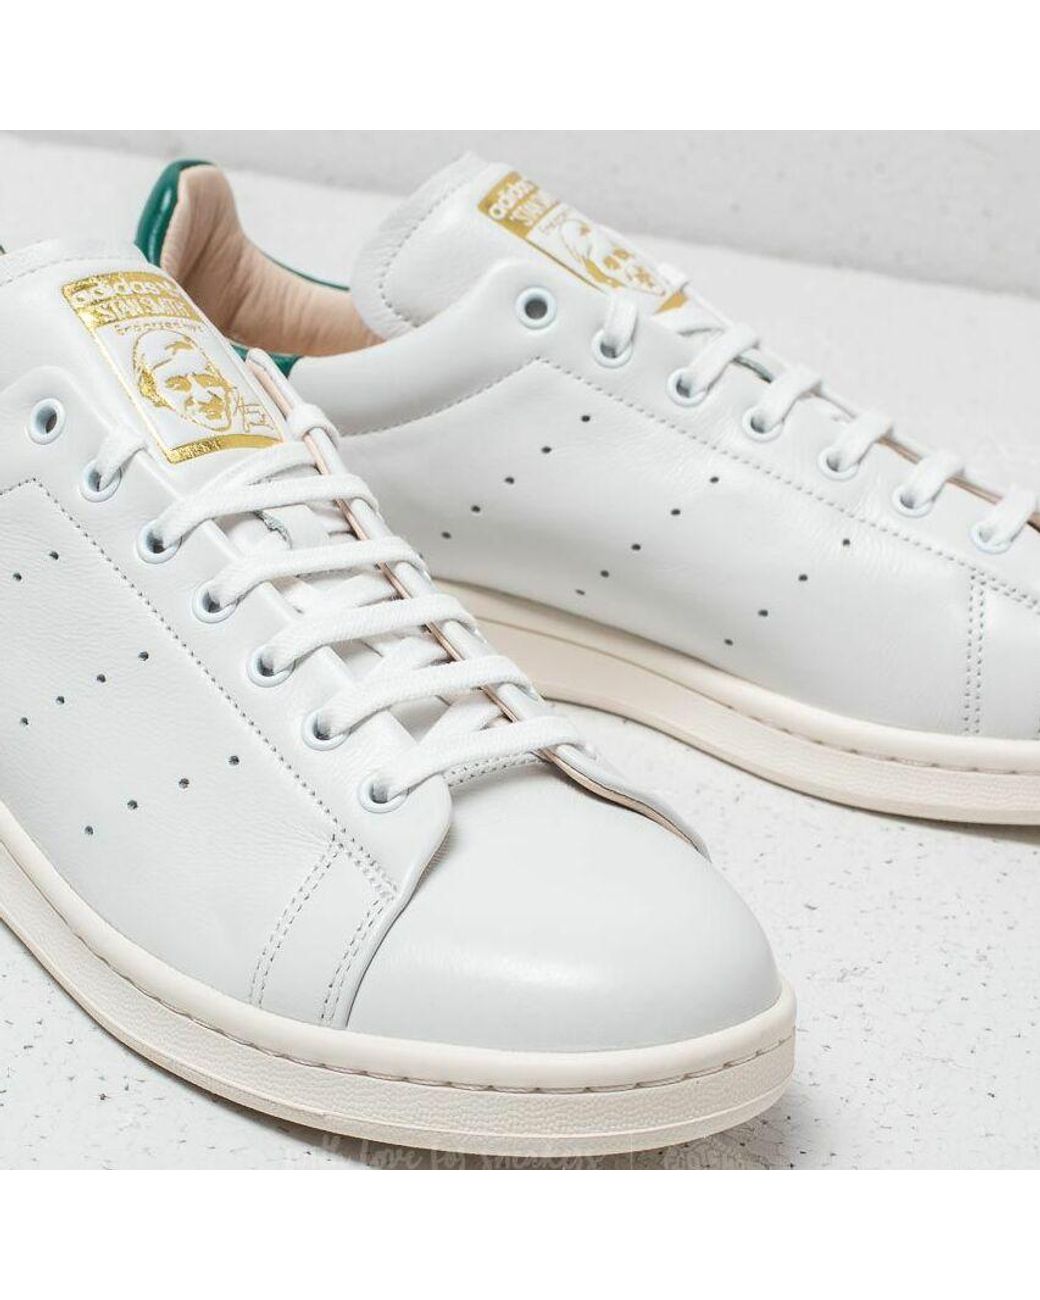 adidas Originals Adidas Stan Smith Recon Ftw White/ Ftw White/ Noble Green  for Men | Lyst